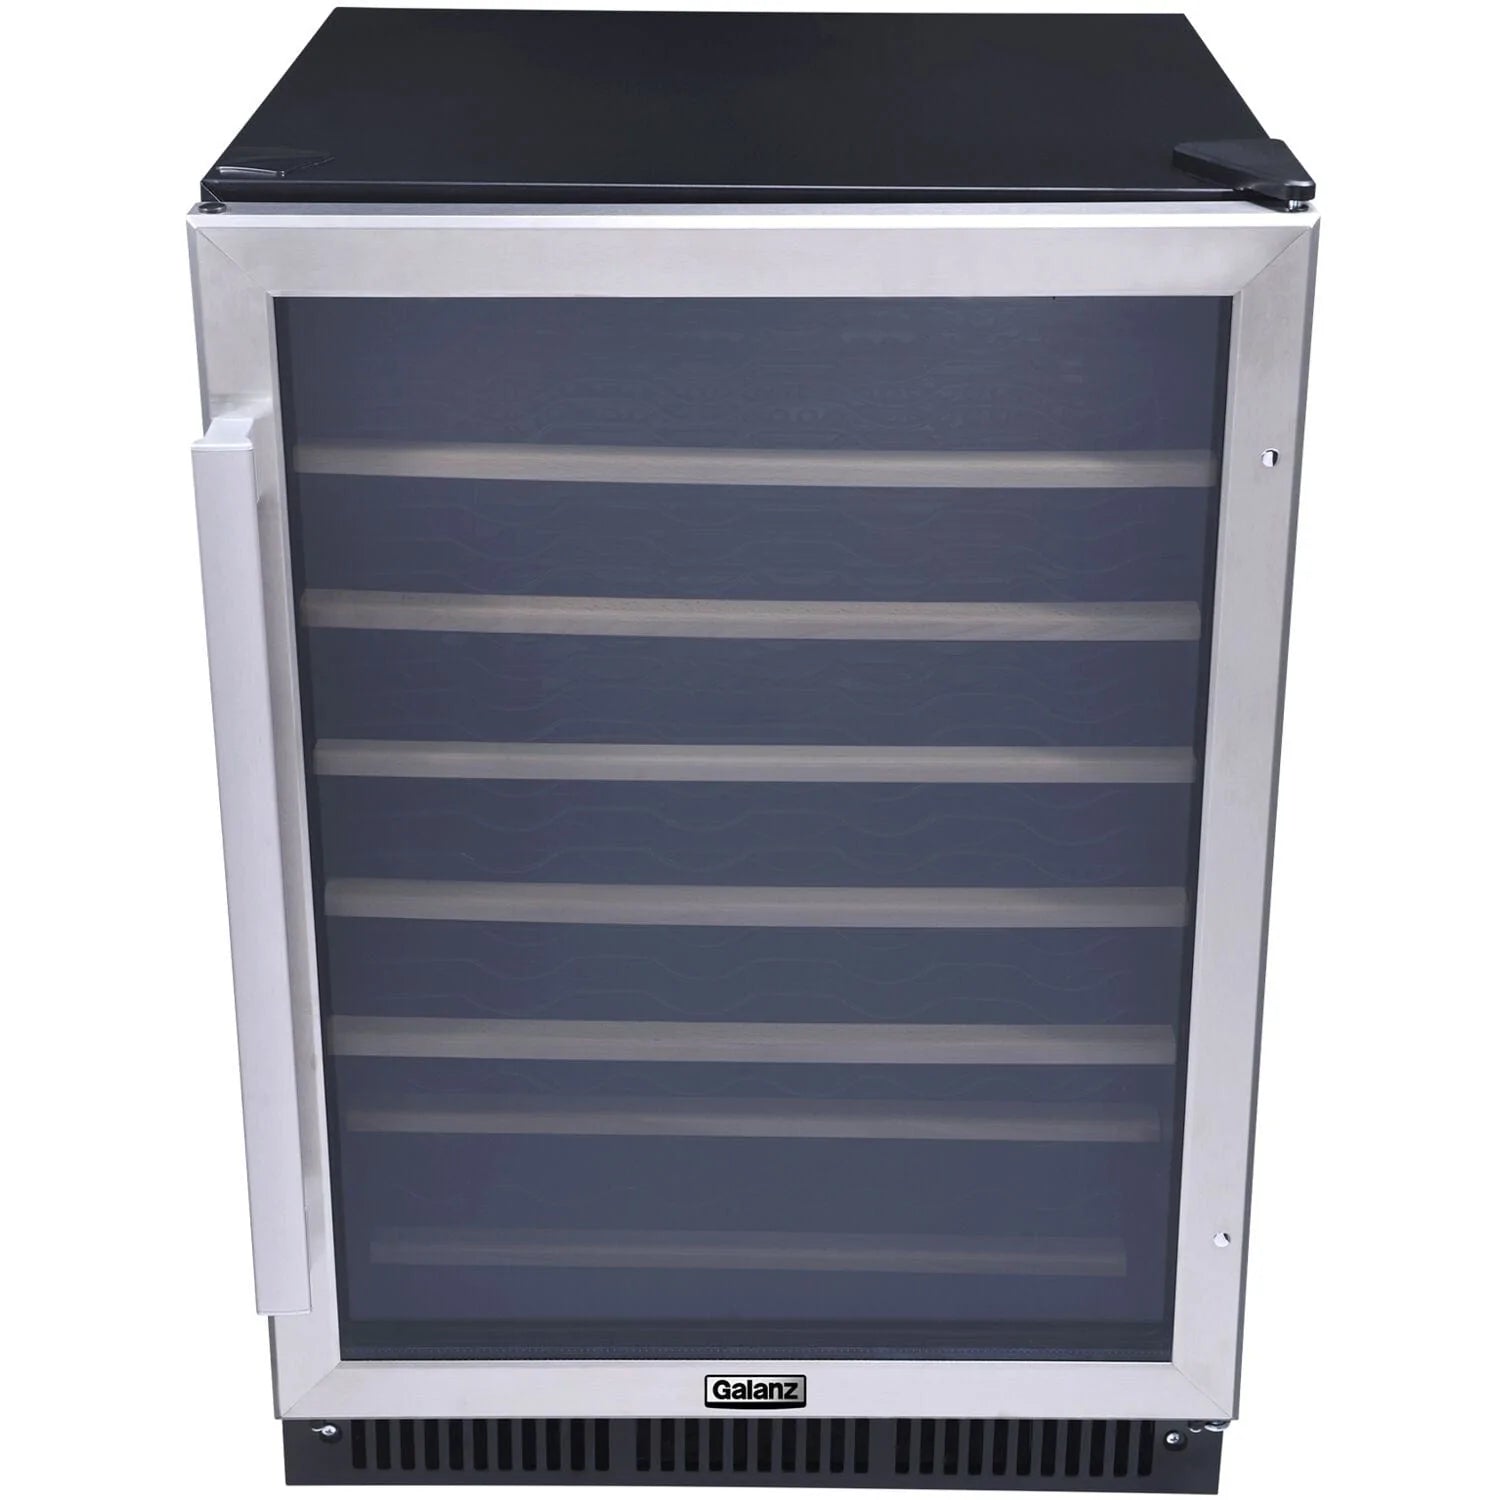 Galanz 47-Bottle Built-In Wine Cooler in Stainless Steel (GLW57MS2B16)